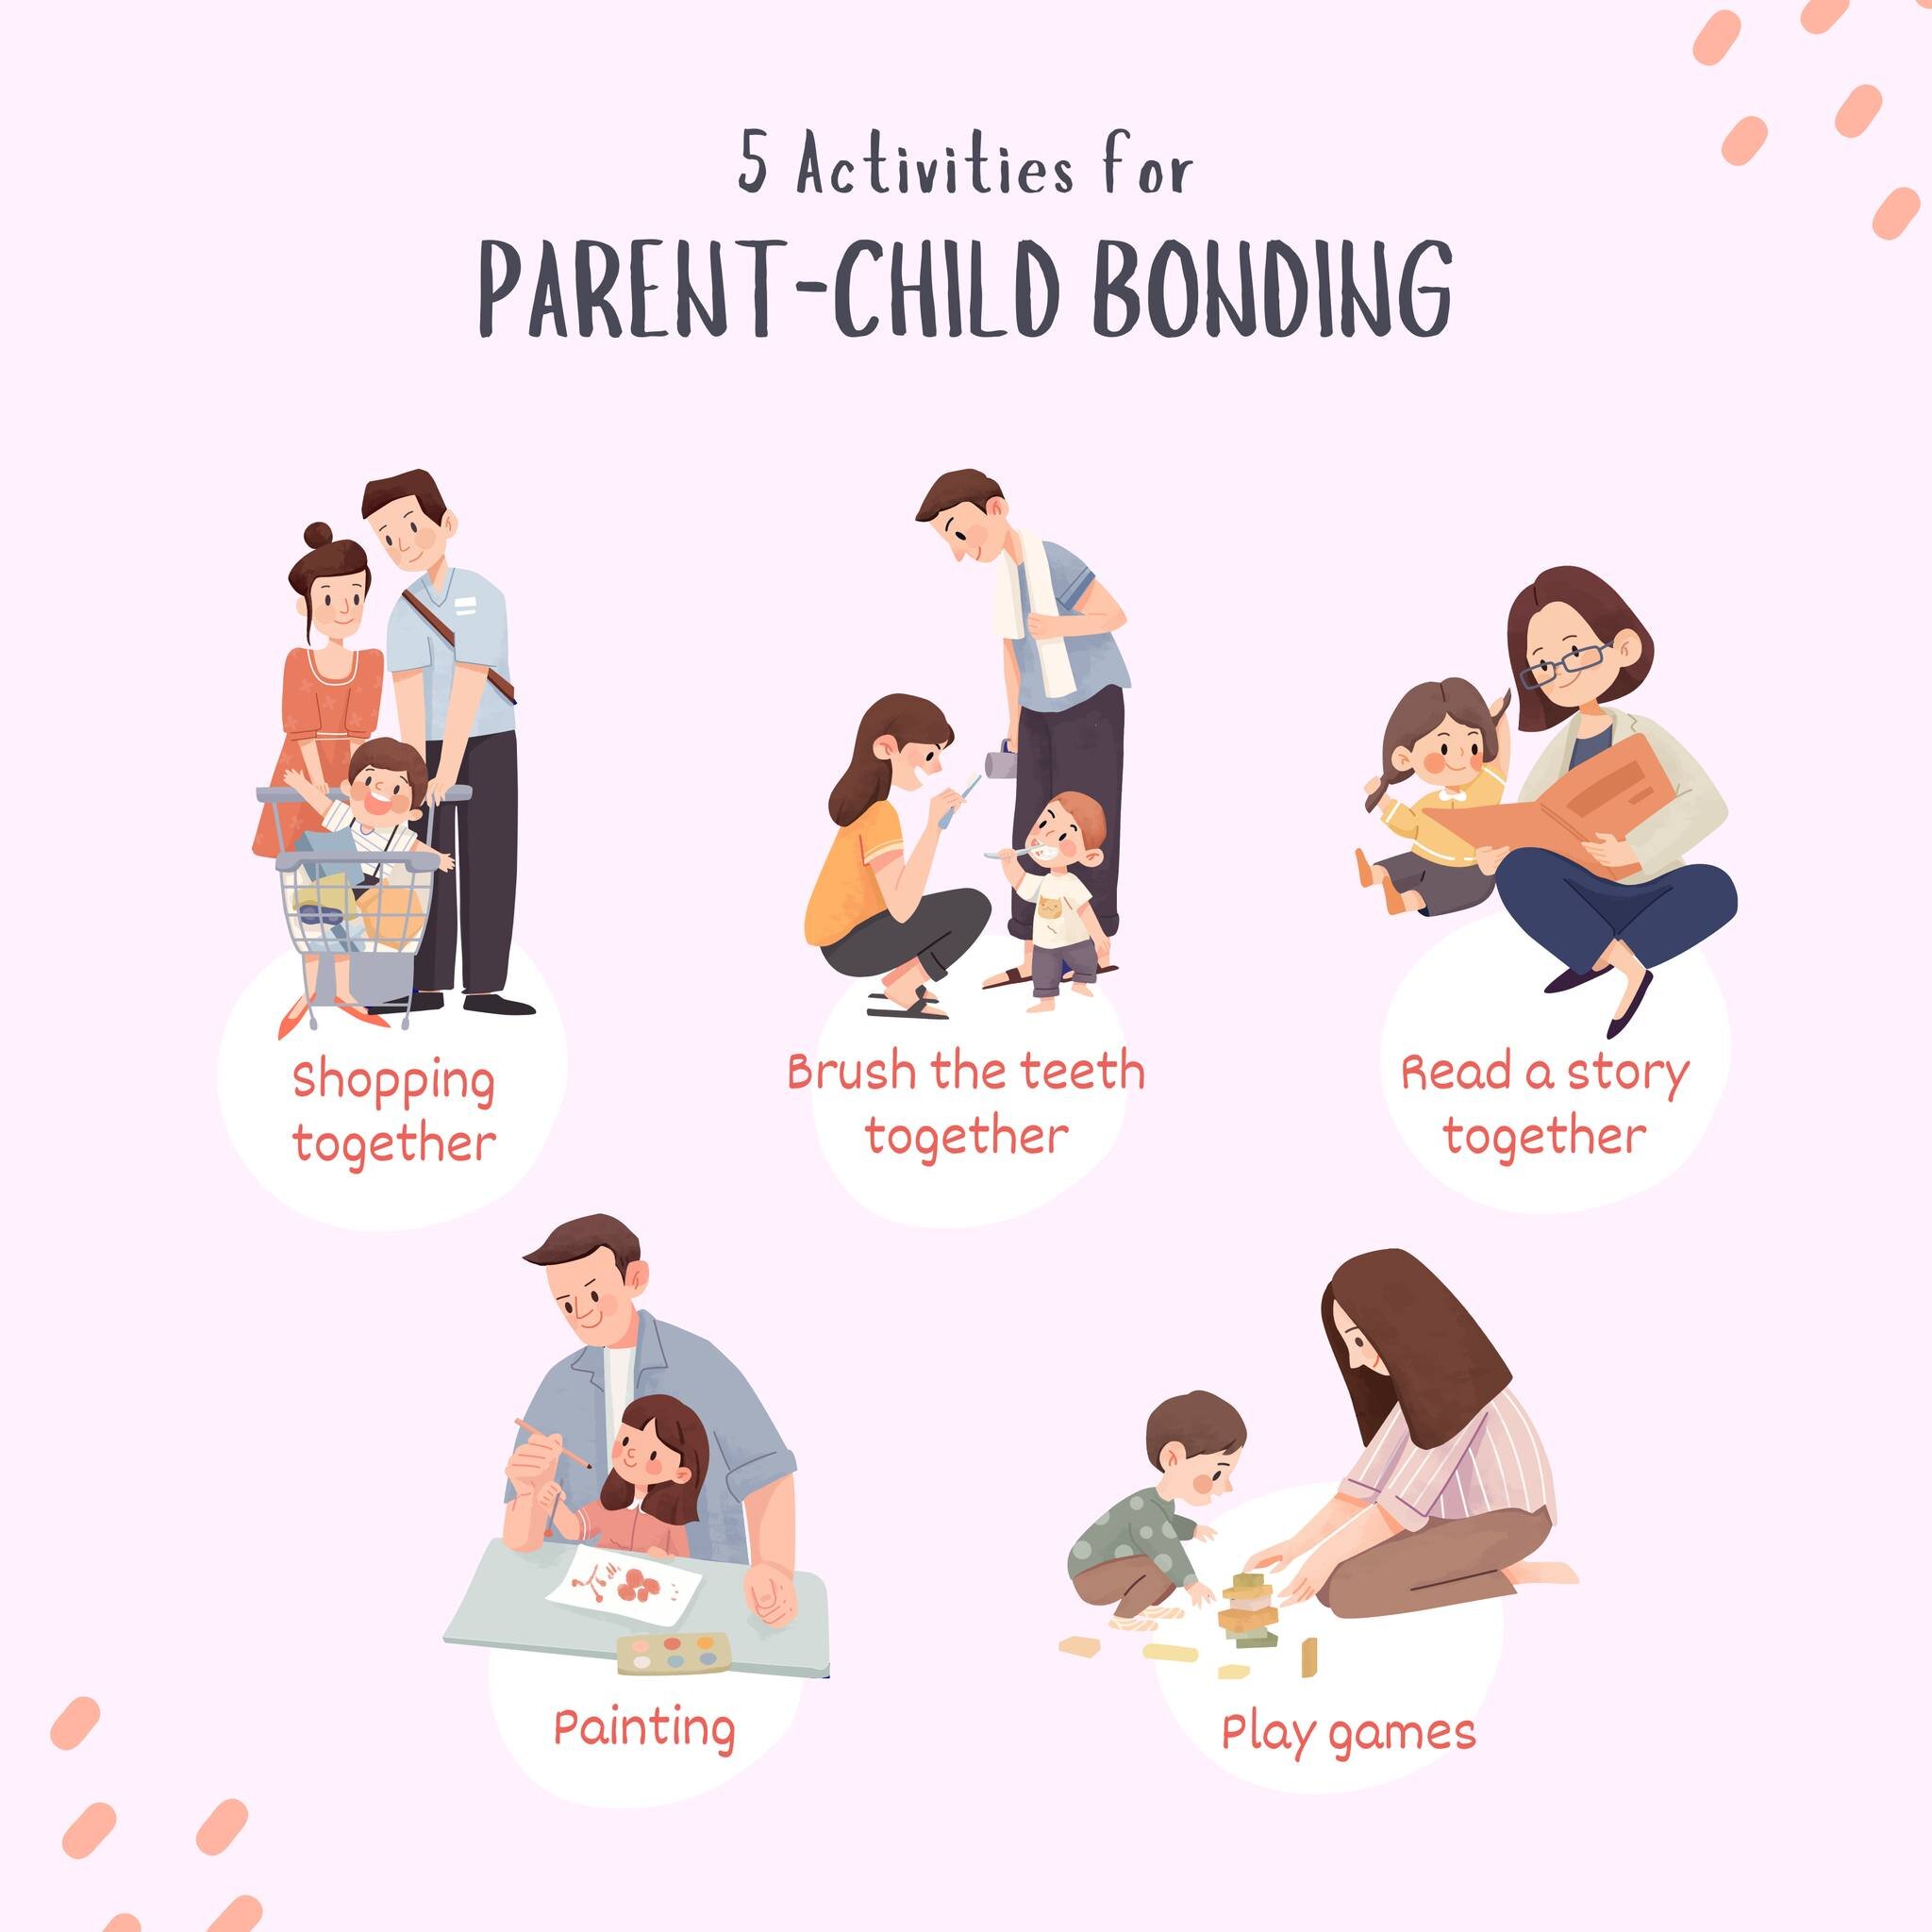 Looking for ways to strengthen your bond with your child? Here are 5 activities that can help you create meaningful memories and foster a stronger parent-child relationship:

1. Shopping: Take your child on a fun shopping trip and let them pick out s